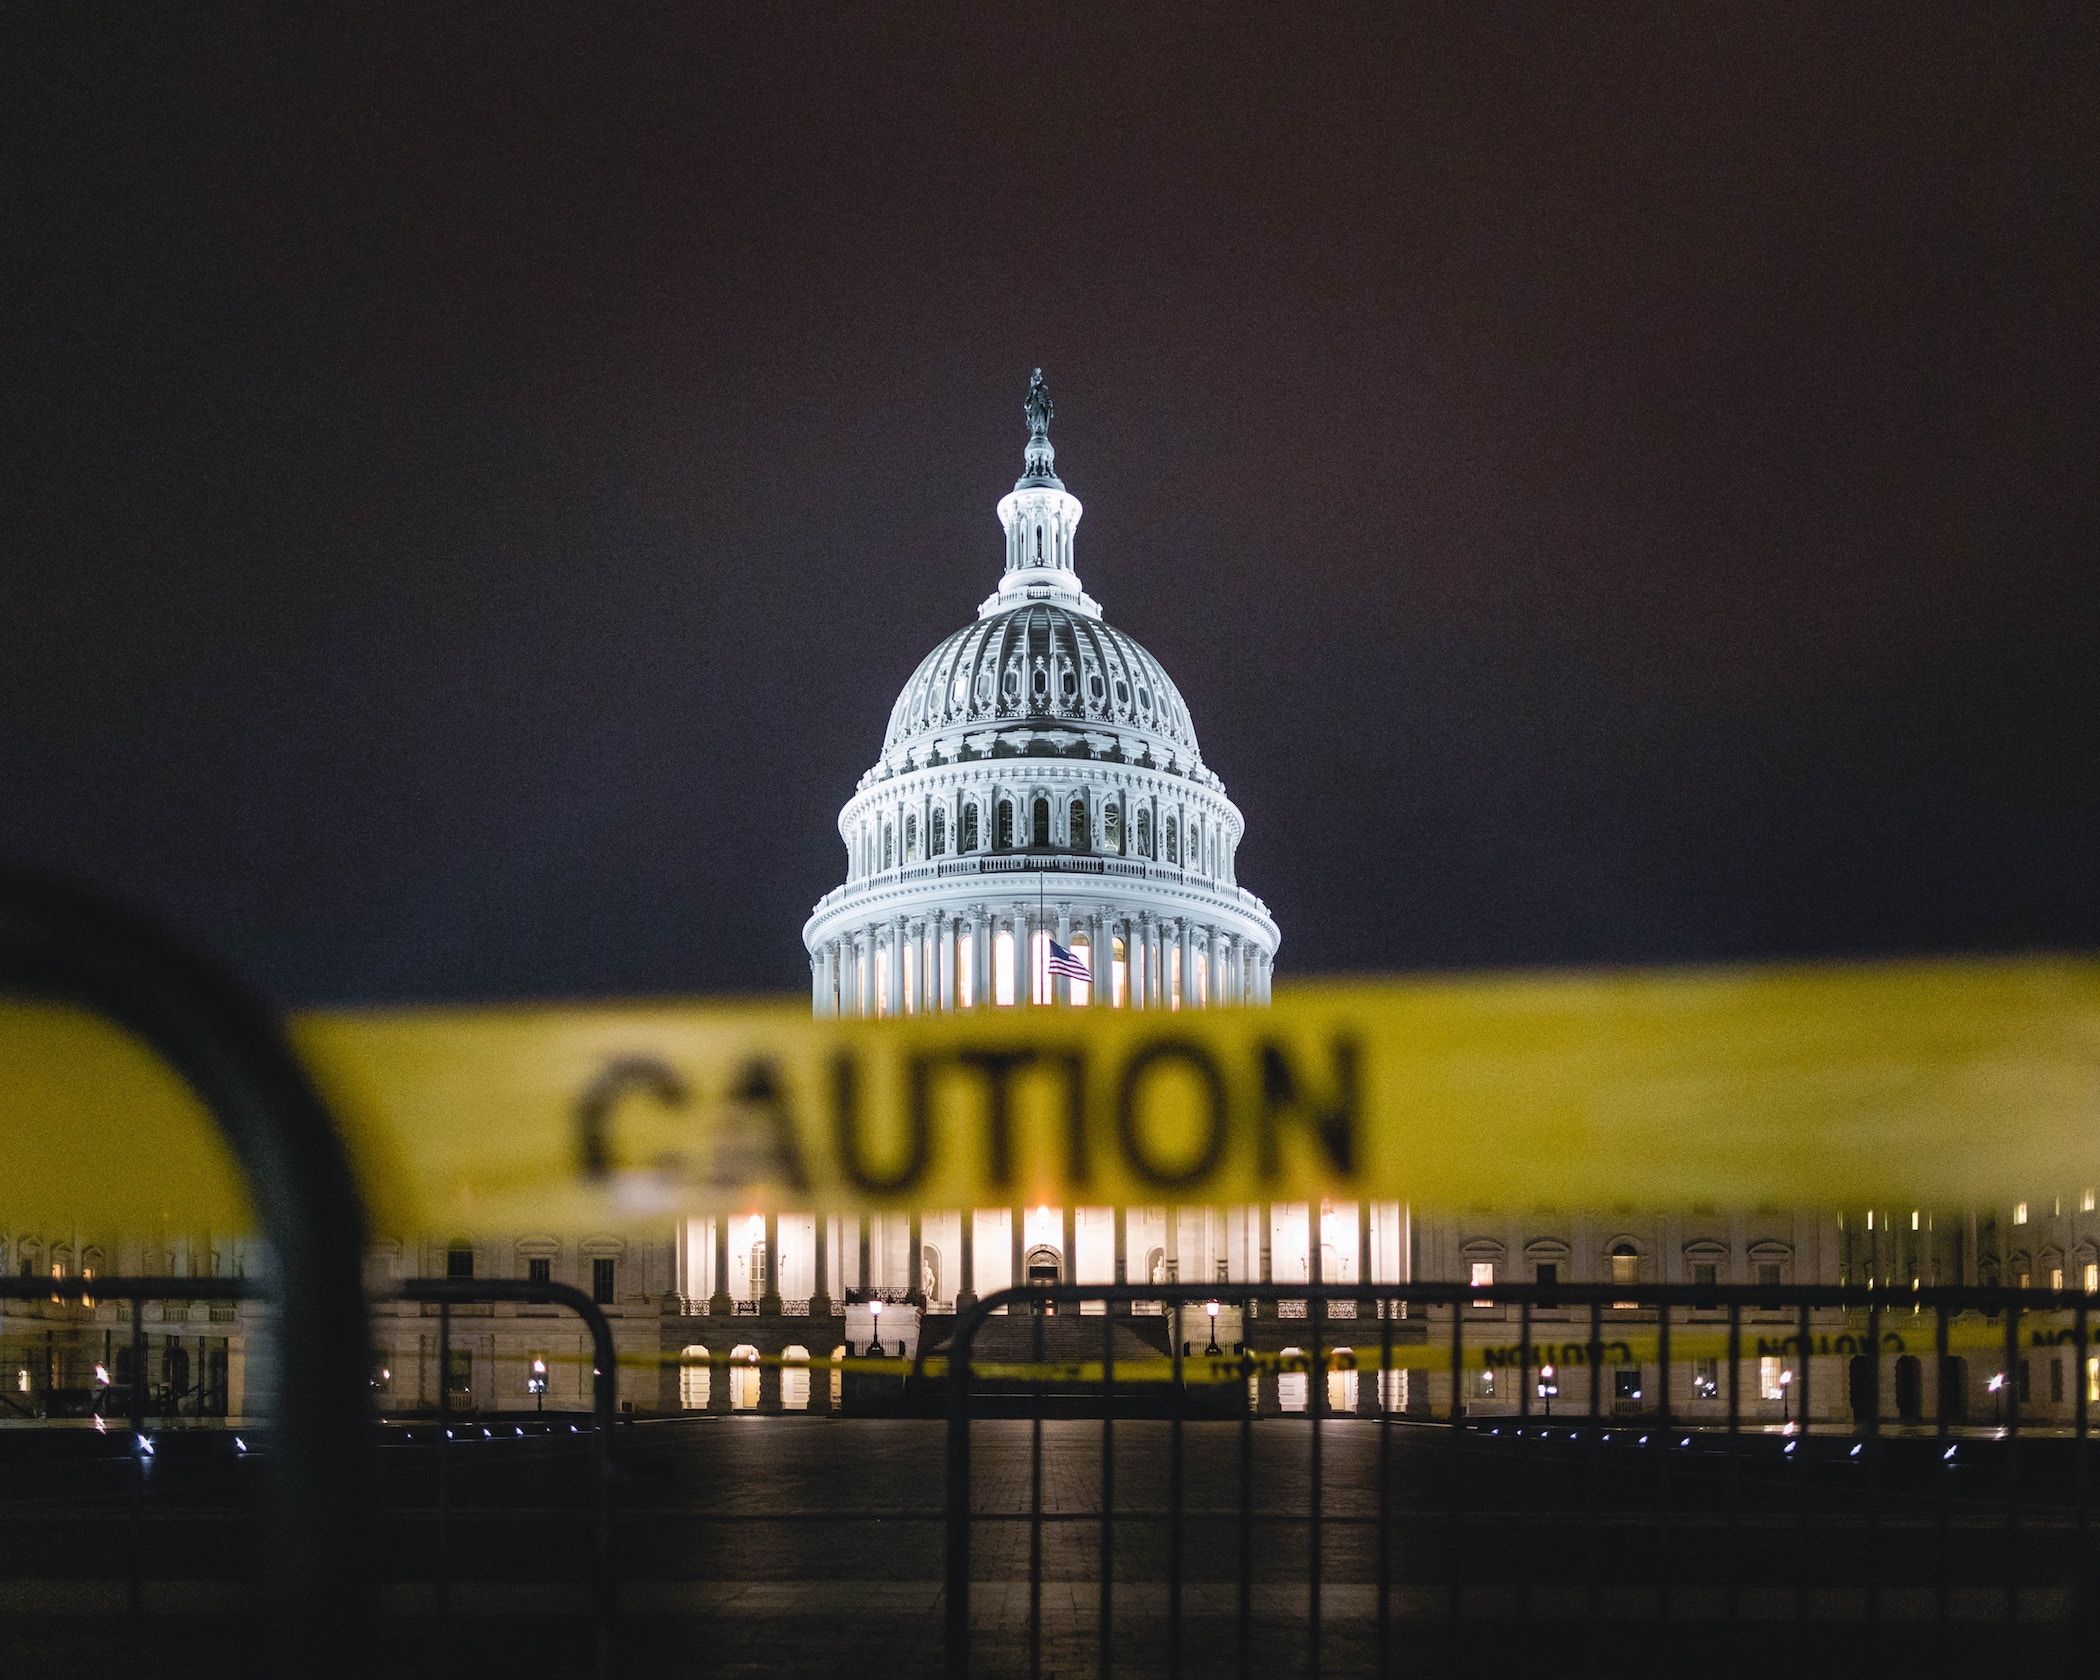 U.S. Capitol with yellow caution tape in front of it